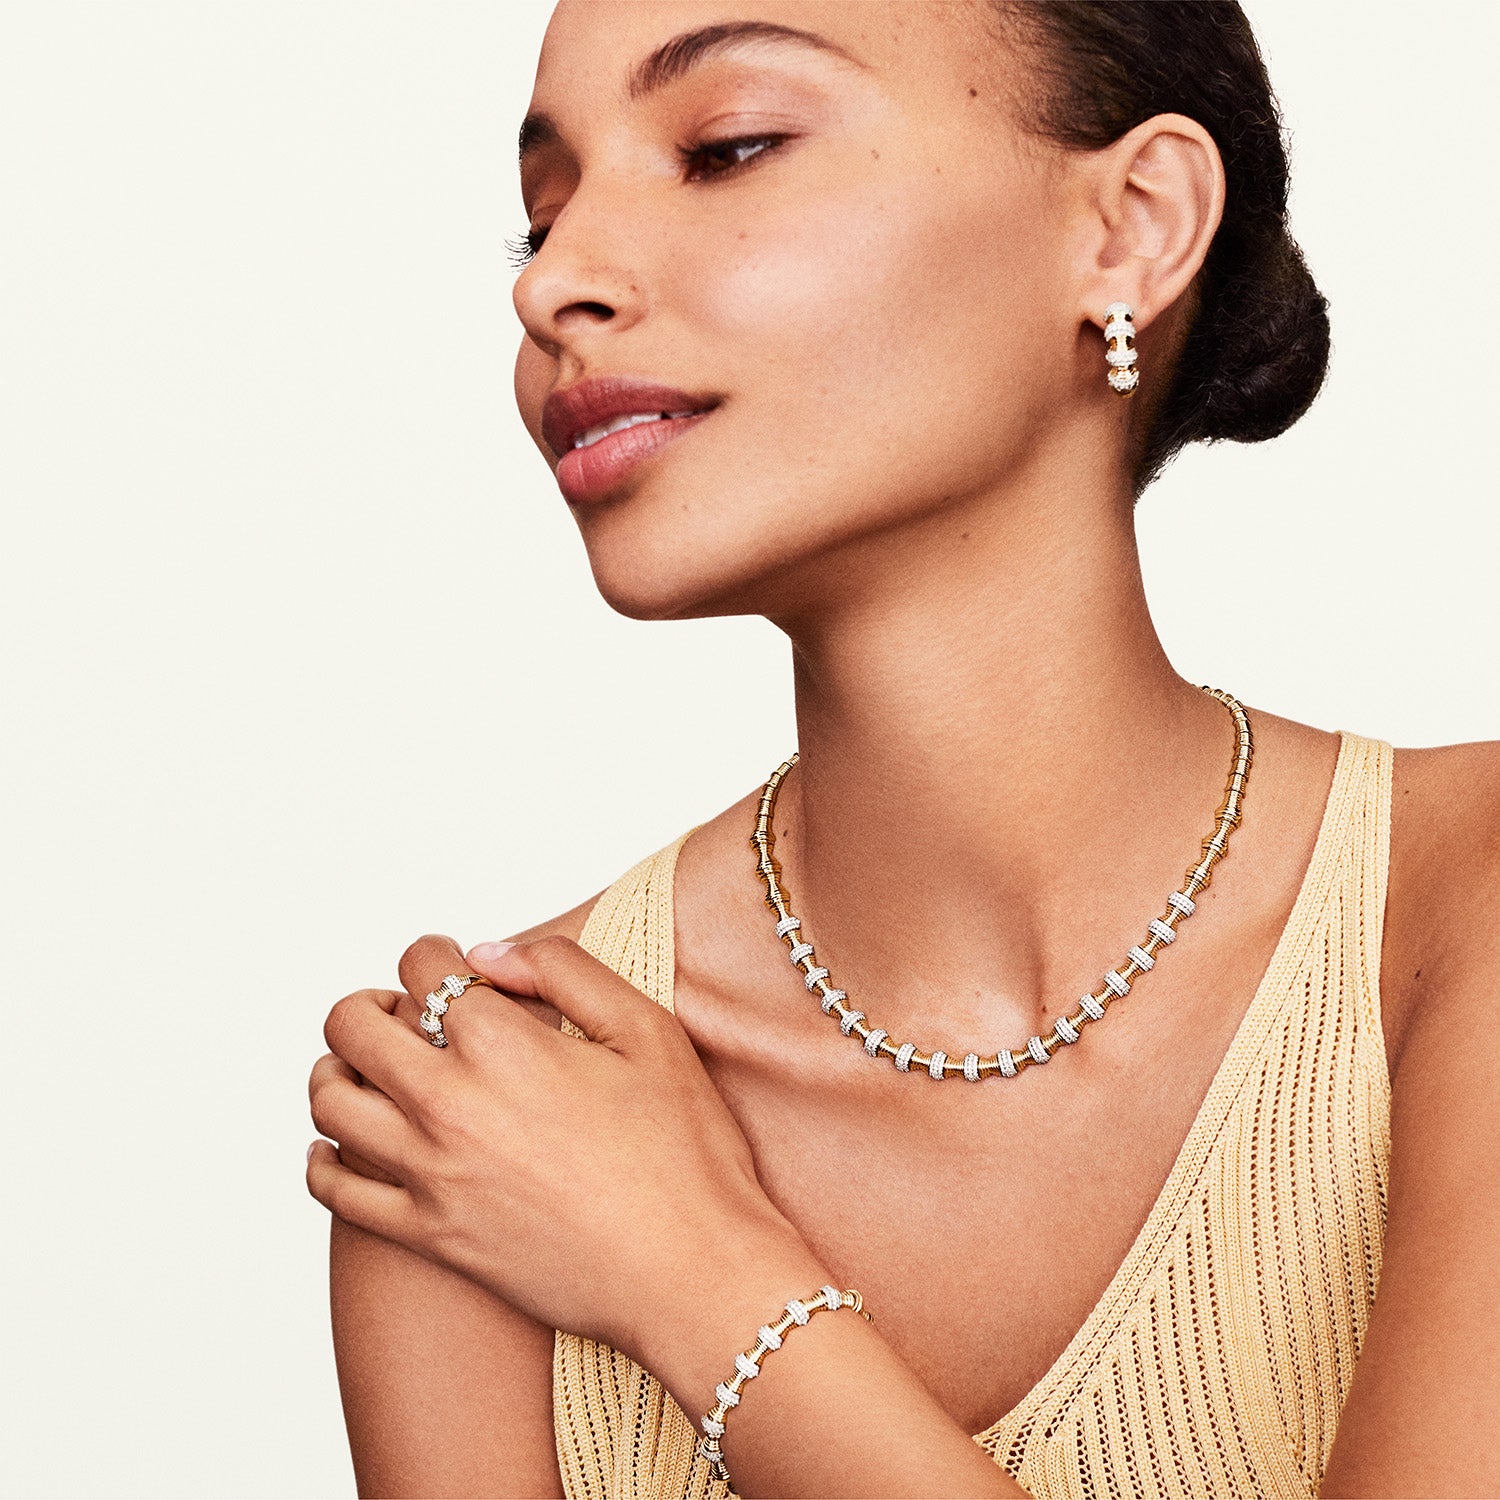 What's New: The Hourglass Collection